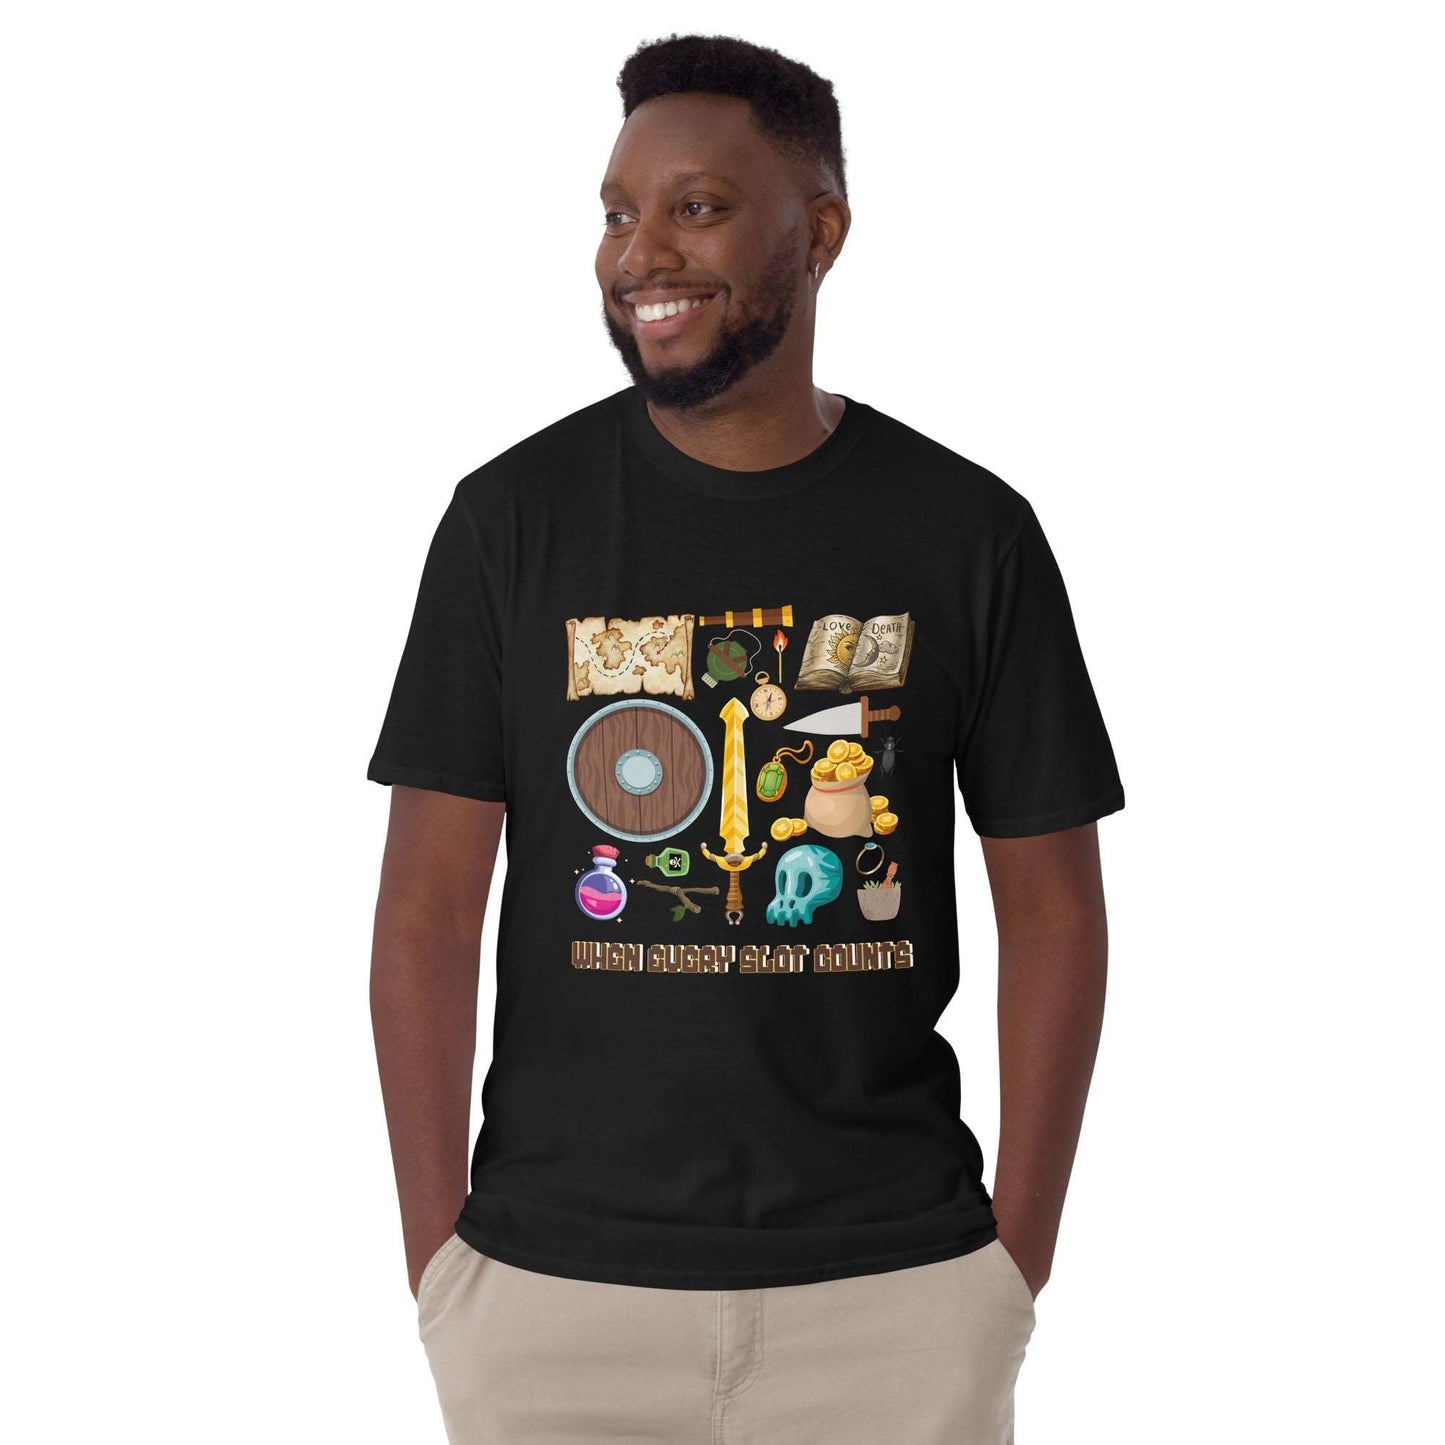 Tetris Inventory, Gamer Fusion T Shirt. Ideal gift for gamers